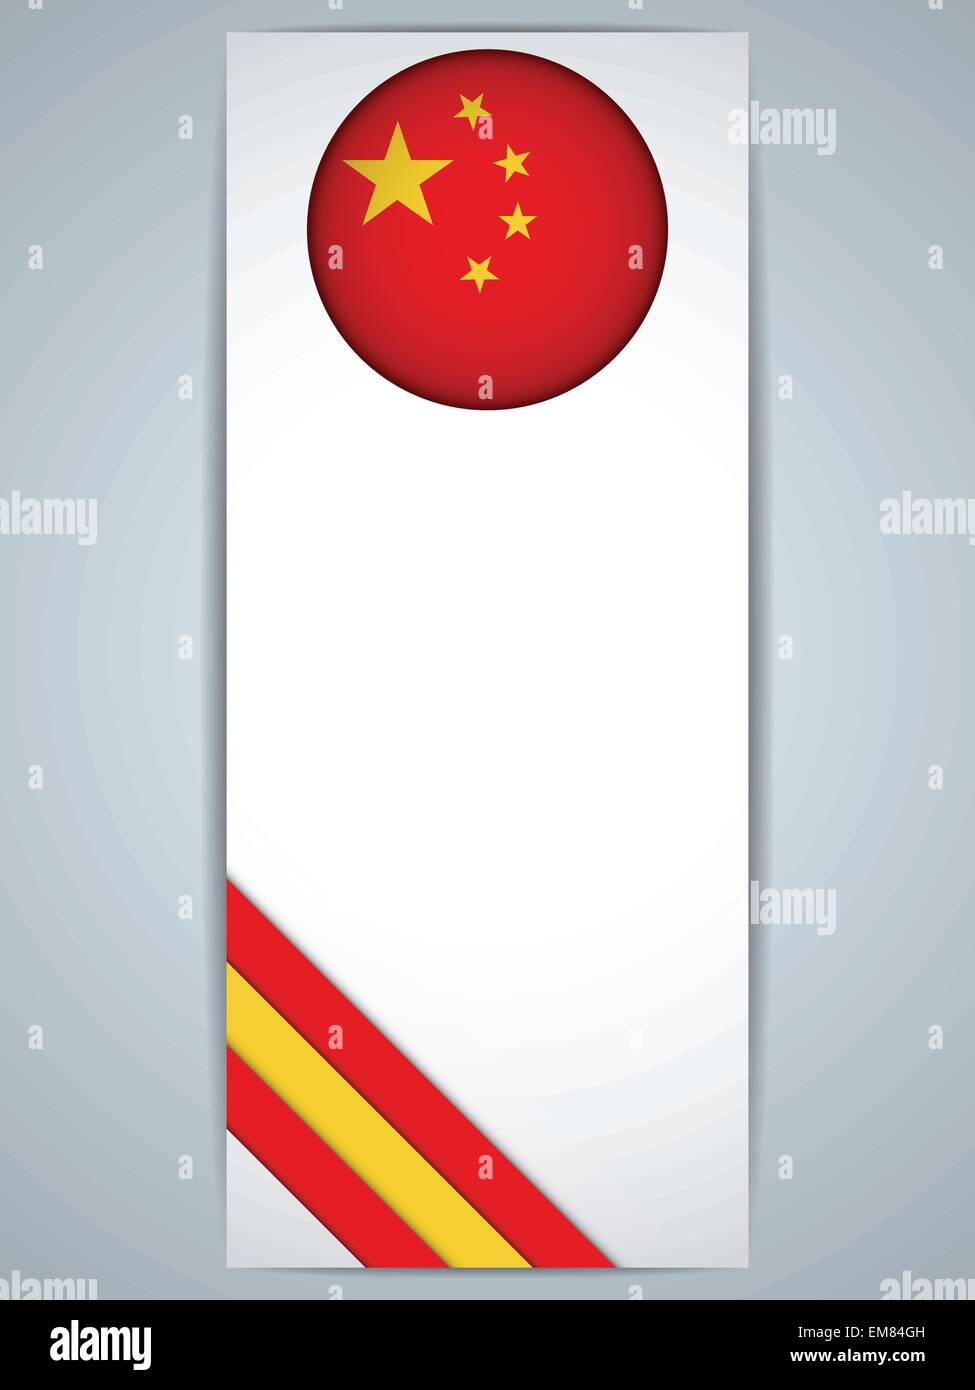 China Country Set of Banners Stock Vector